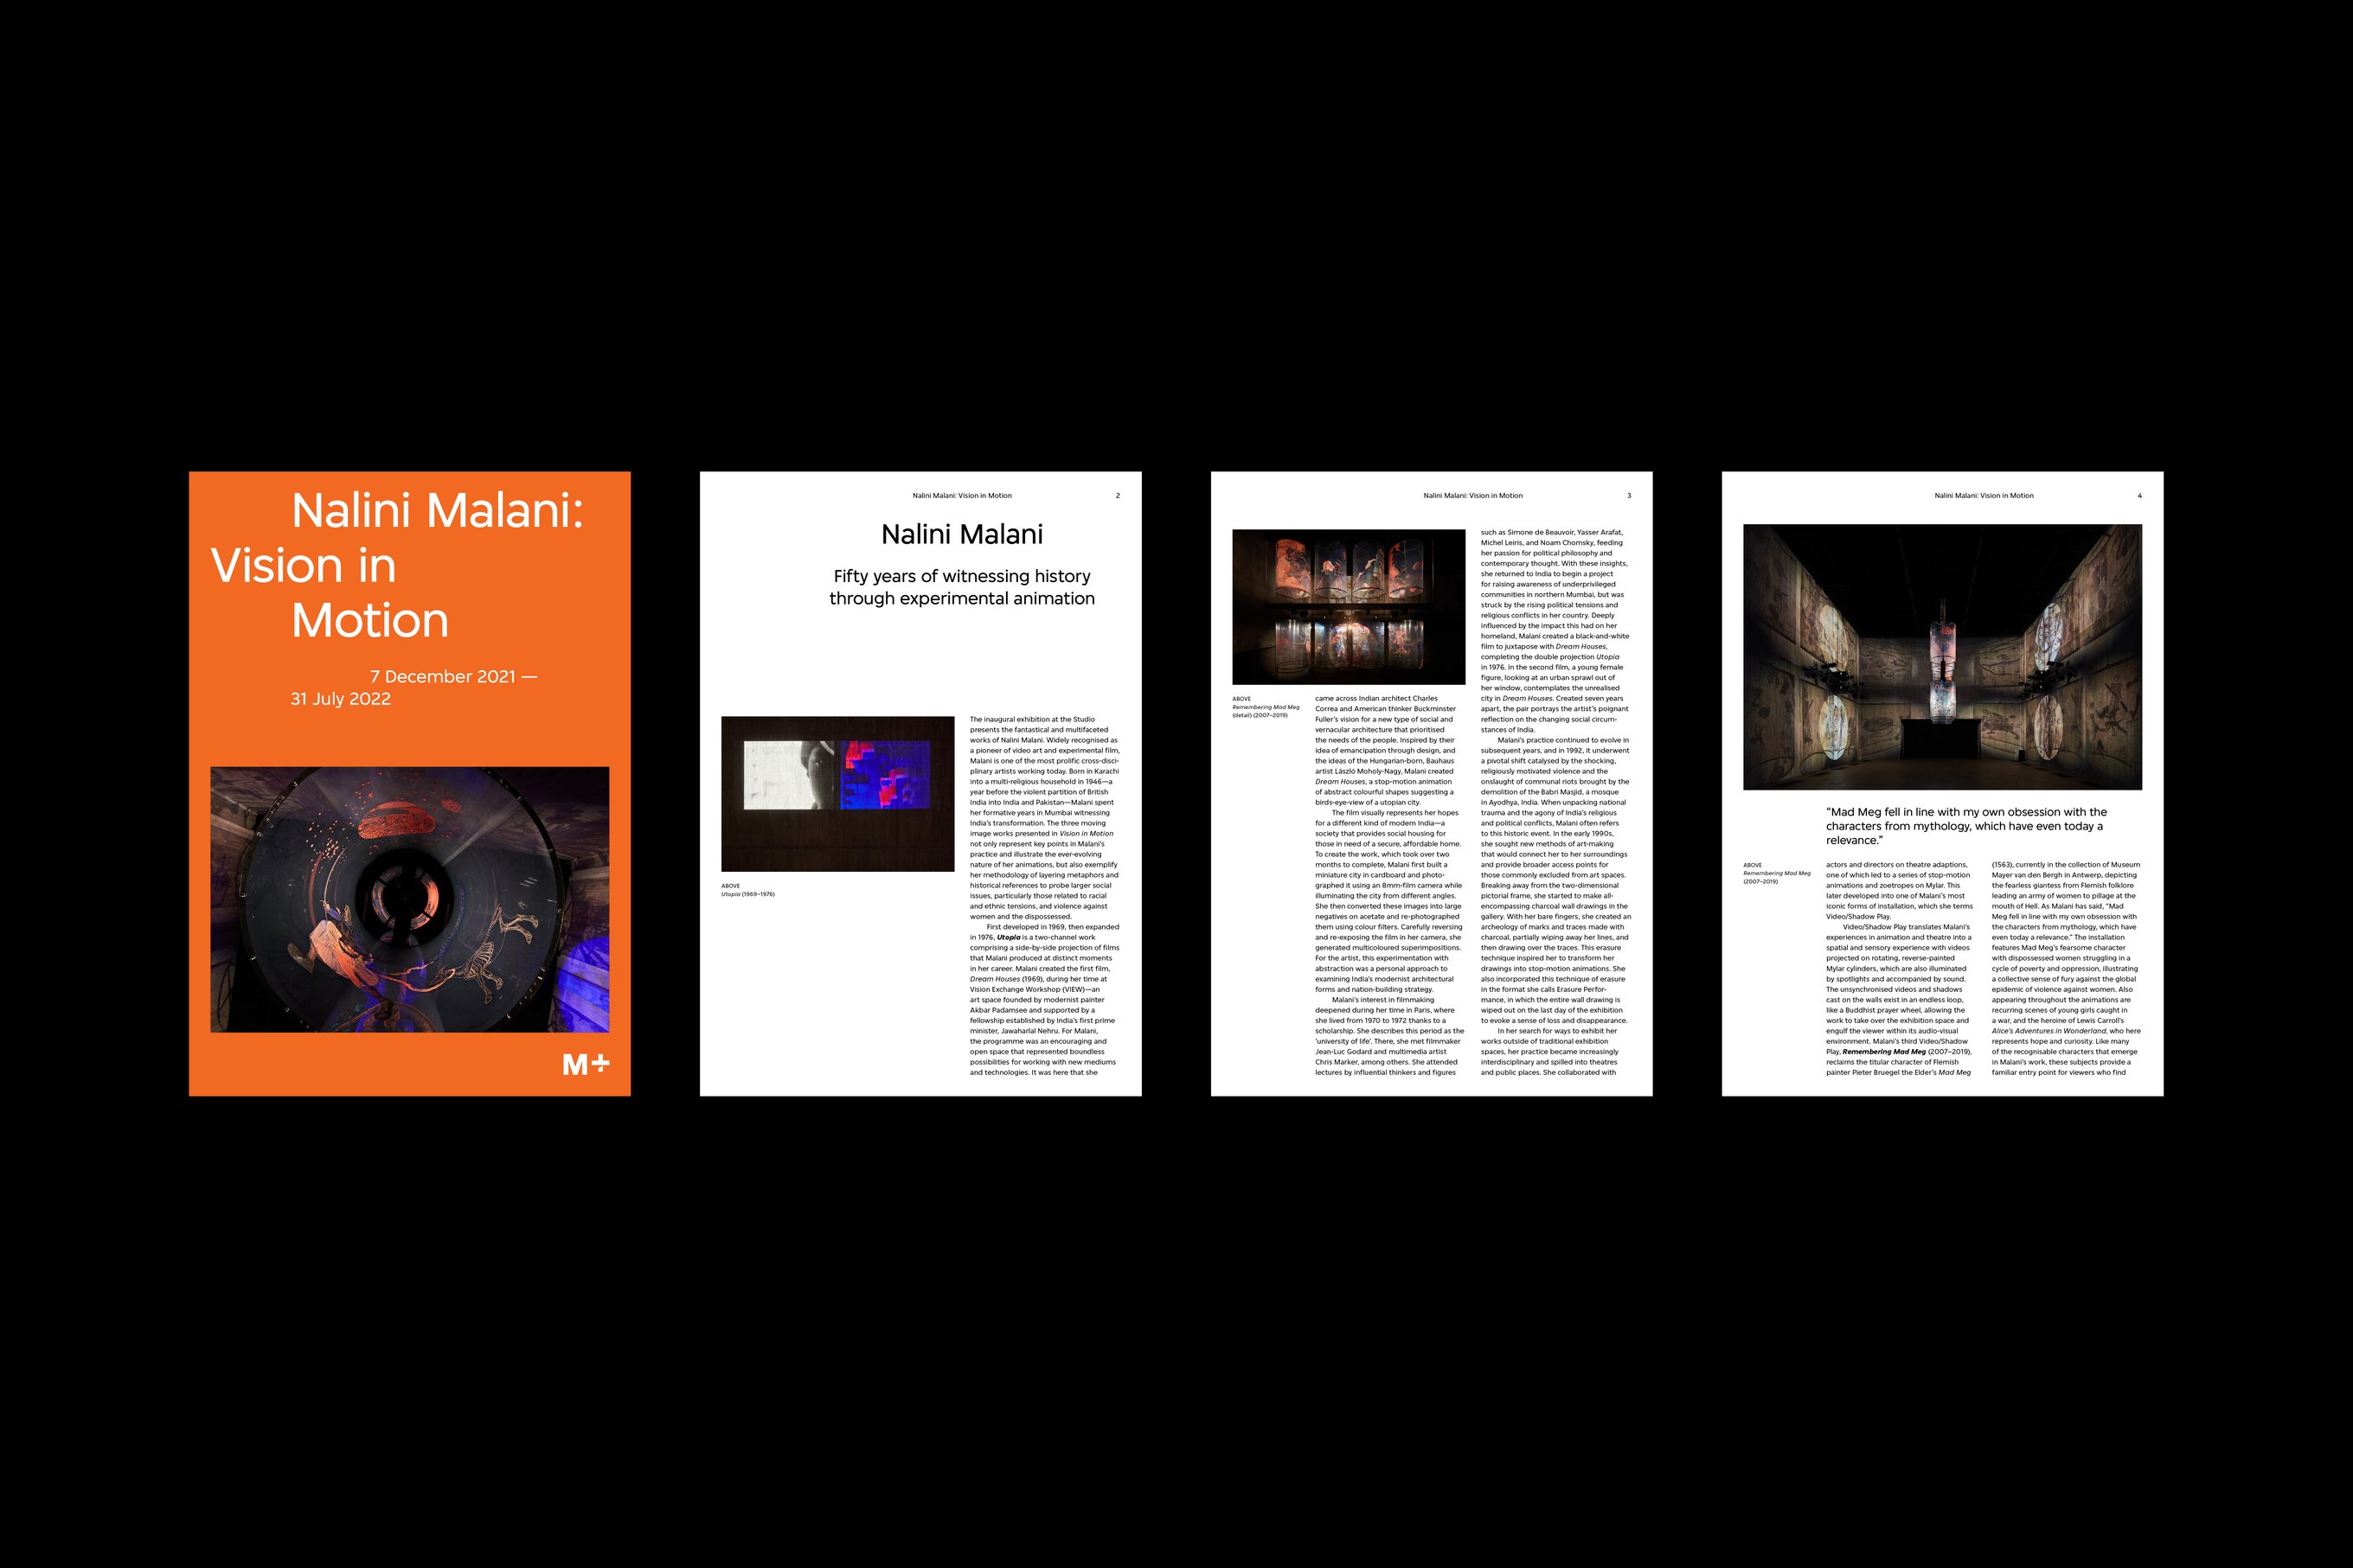 An overview of the Nalini Malani exhibition brochure, including the cover and three essay pages accompanied by images and texts.